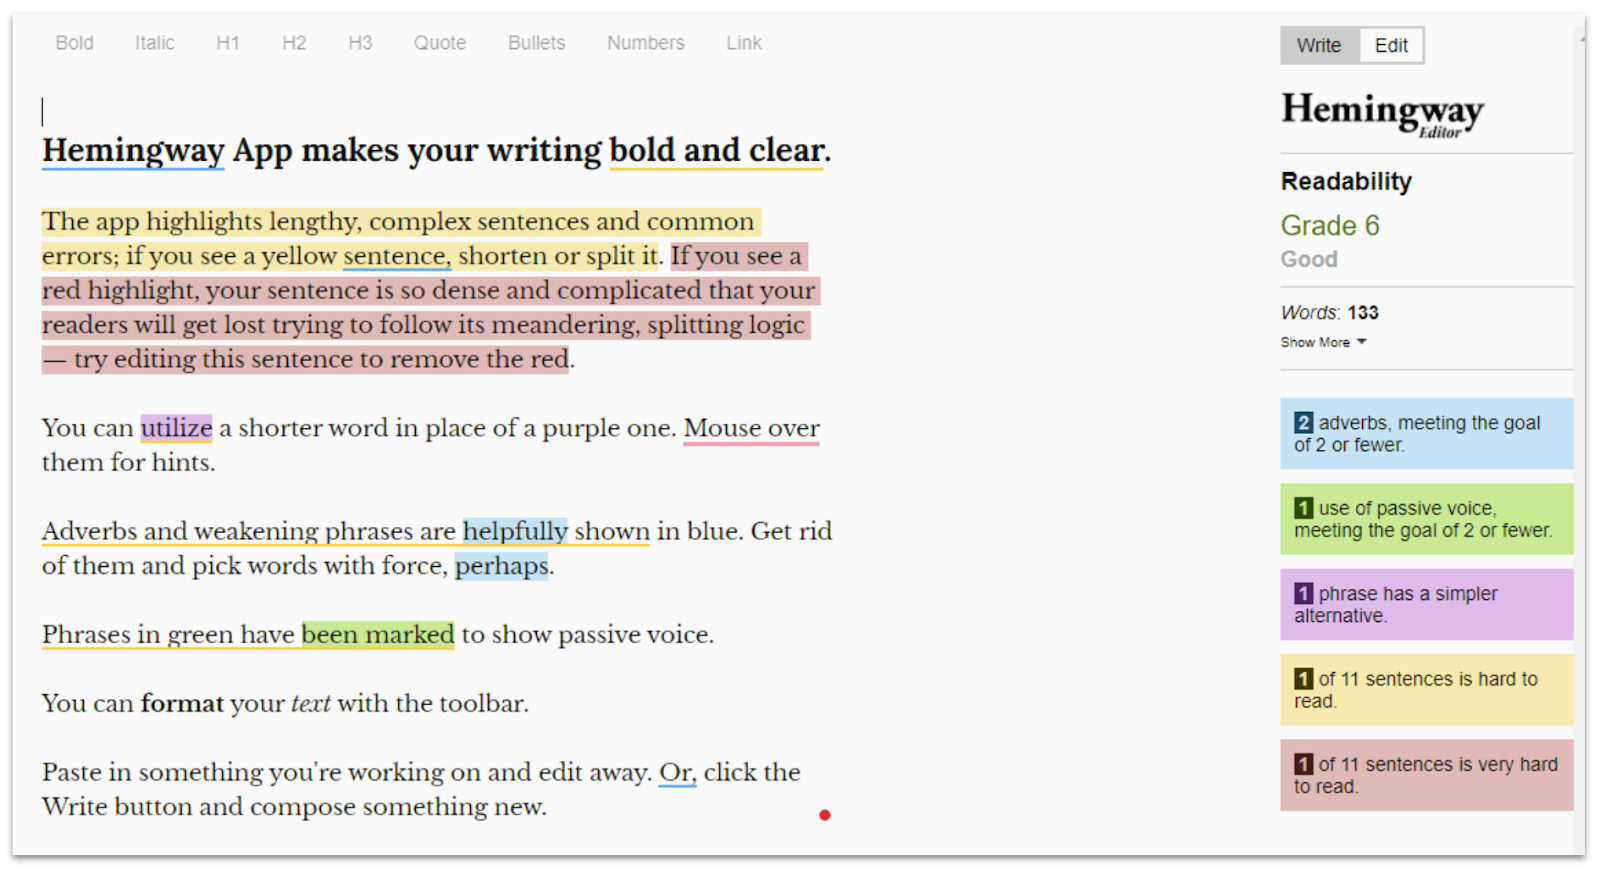 Example of using the Hemingway App to review writing for readability